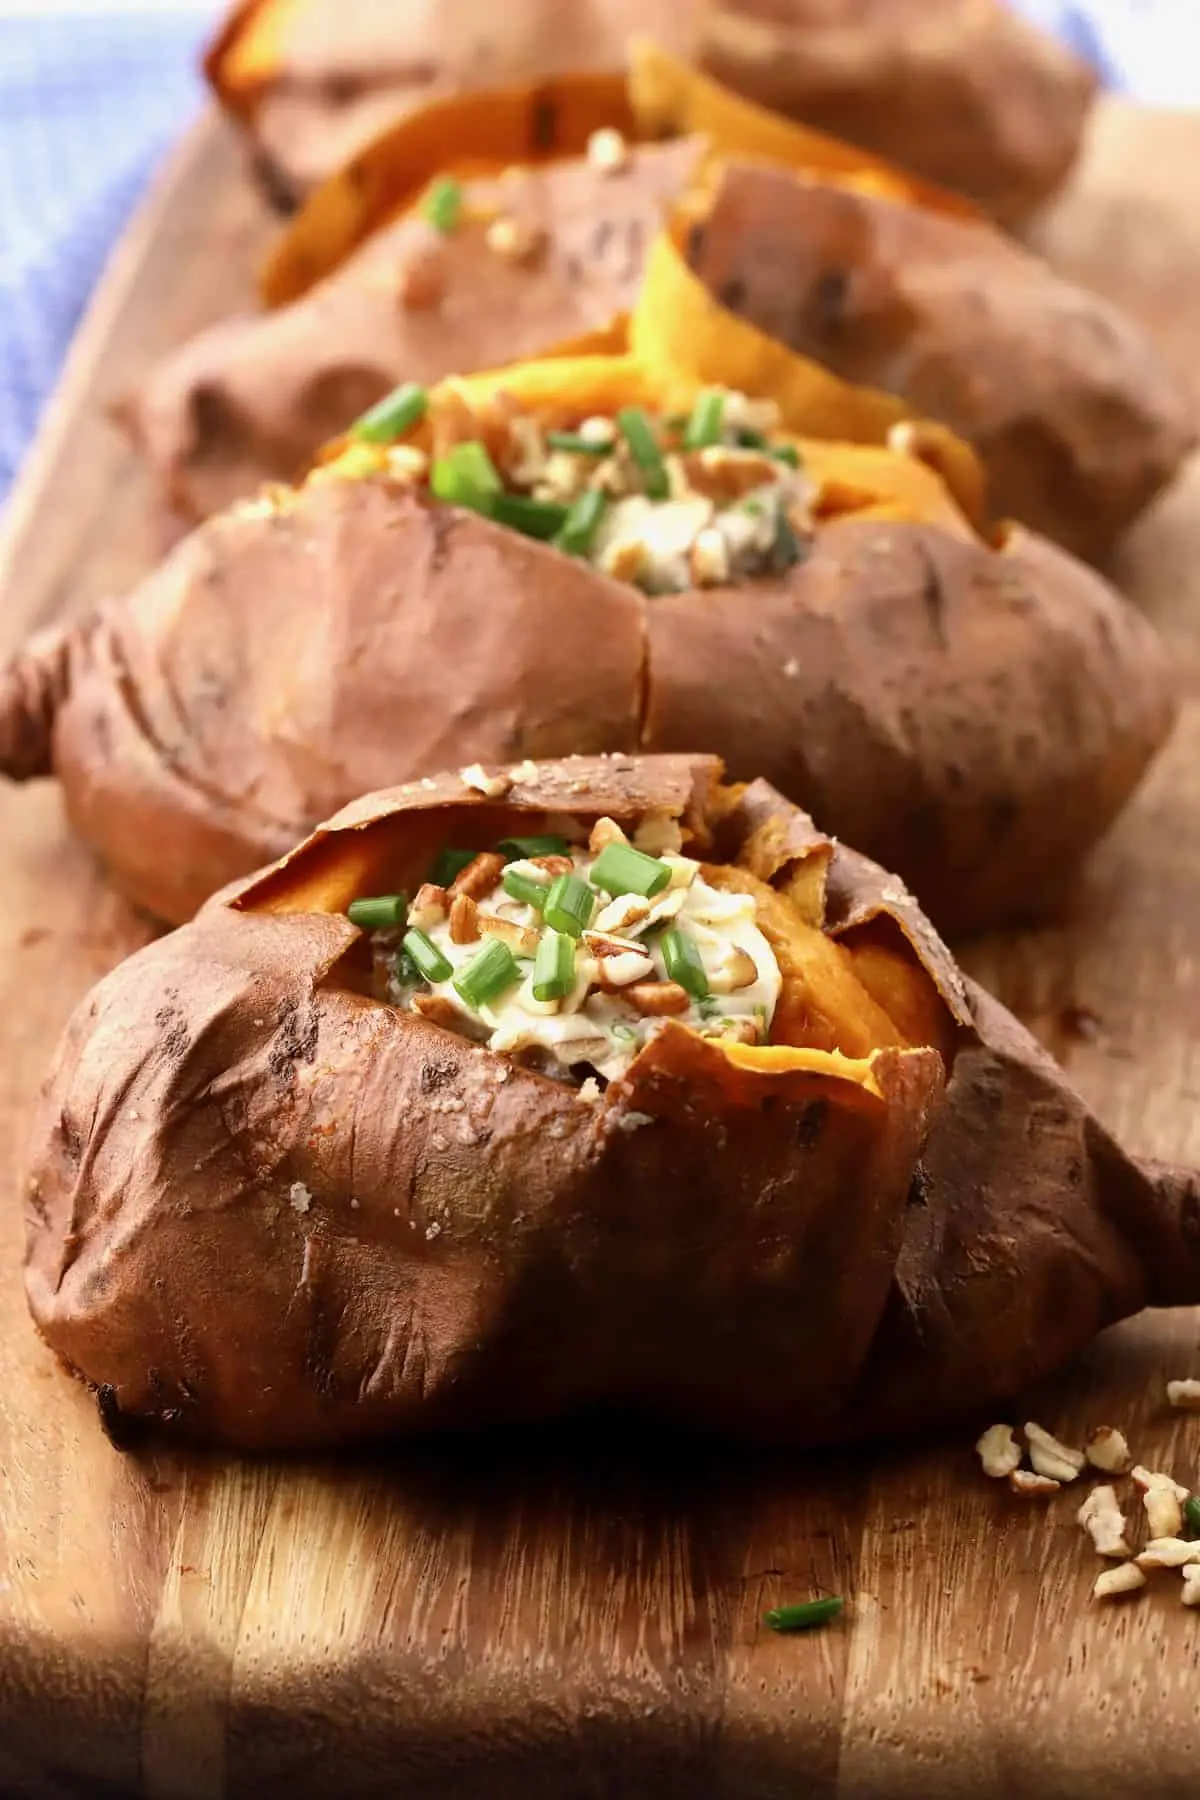 smoked sweet potatoes recipes - Is it better to boil or roast sweet potatoes